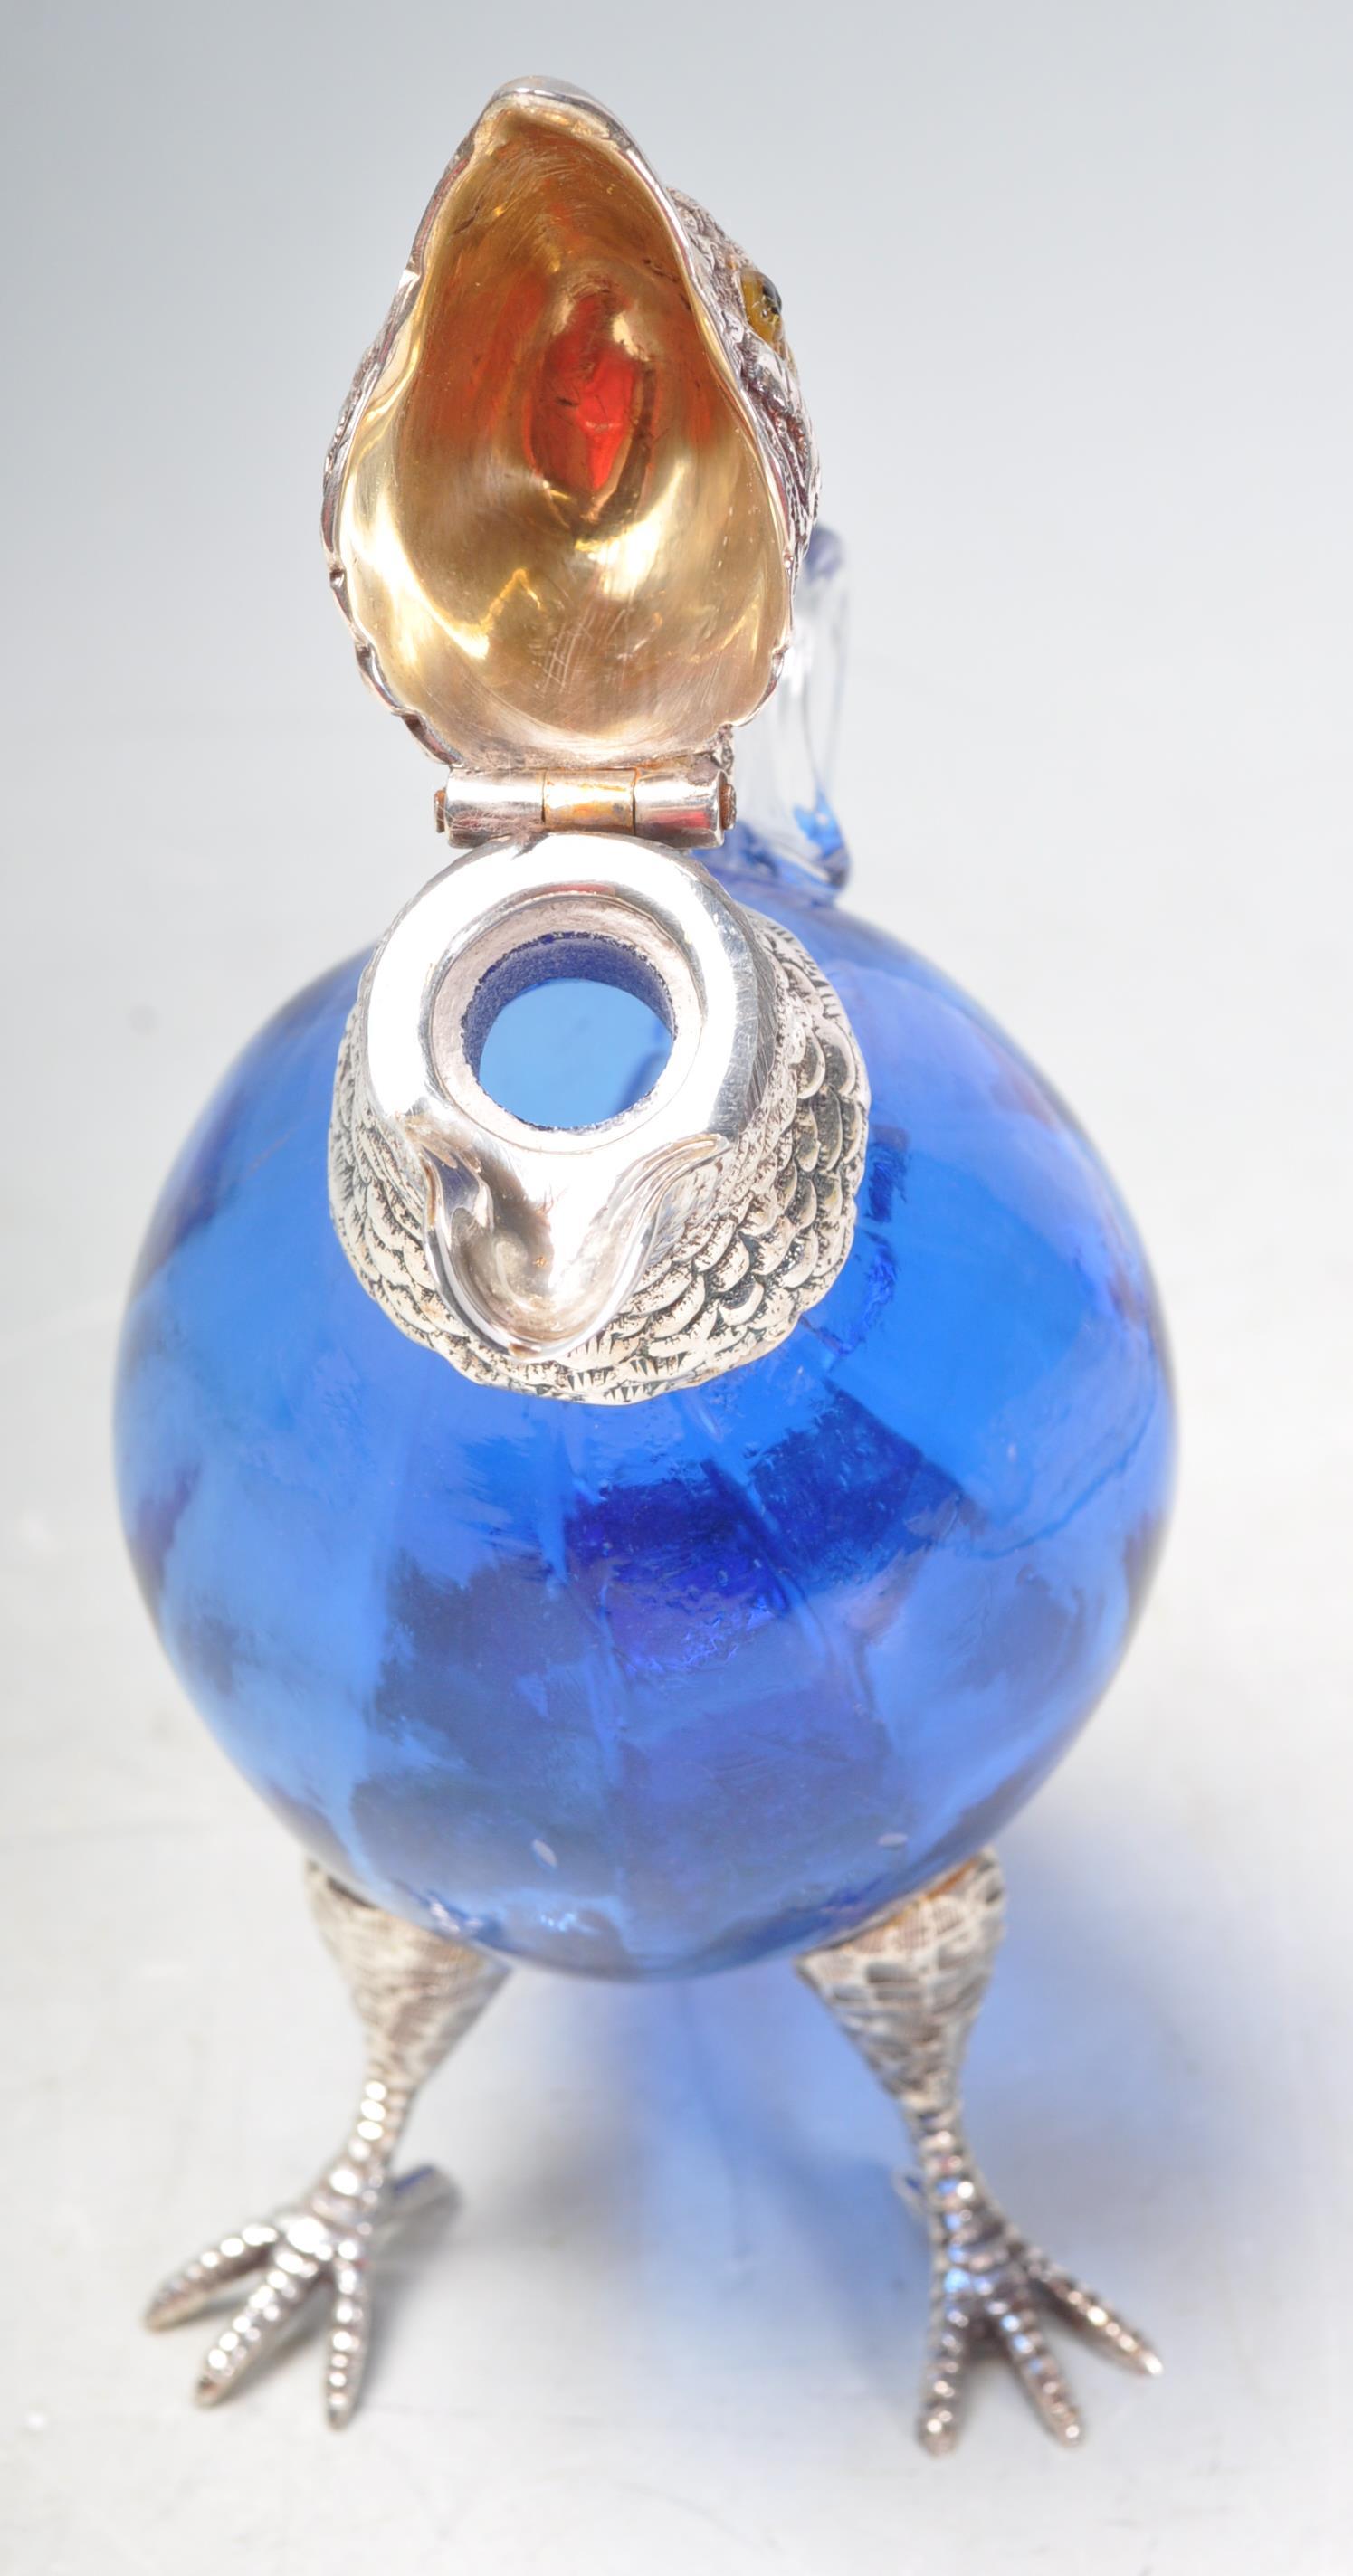 SILVER PLATE AND BLUE GLASS PARROT CLARET JUG. - Image 7 of 7